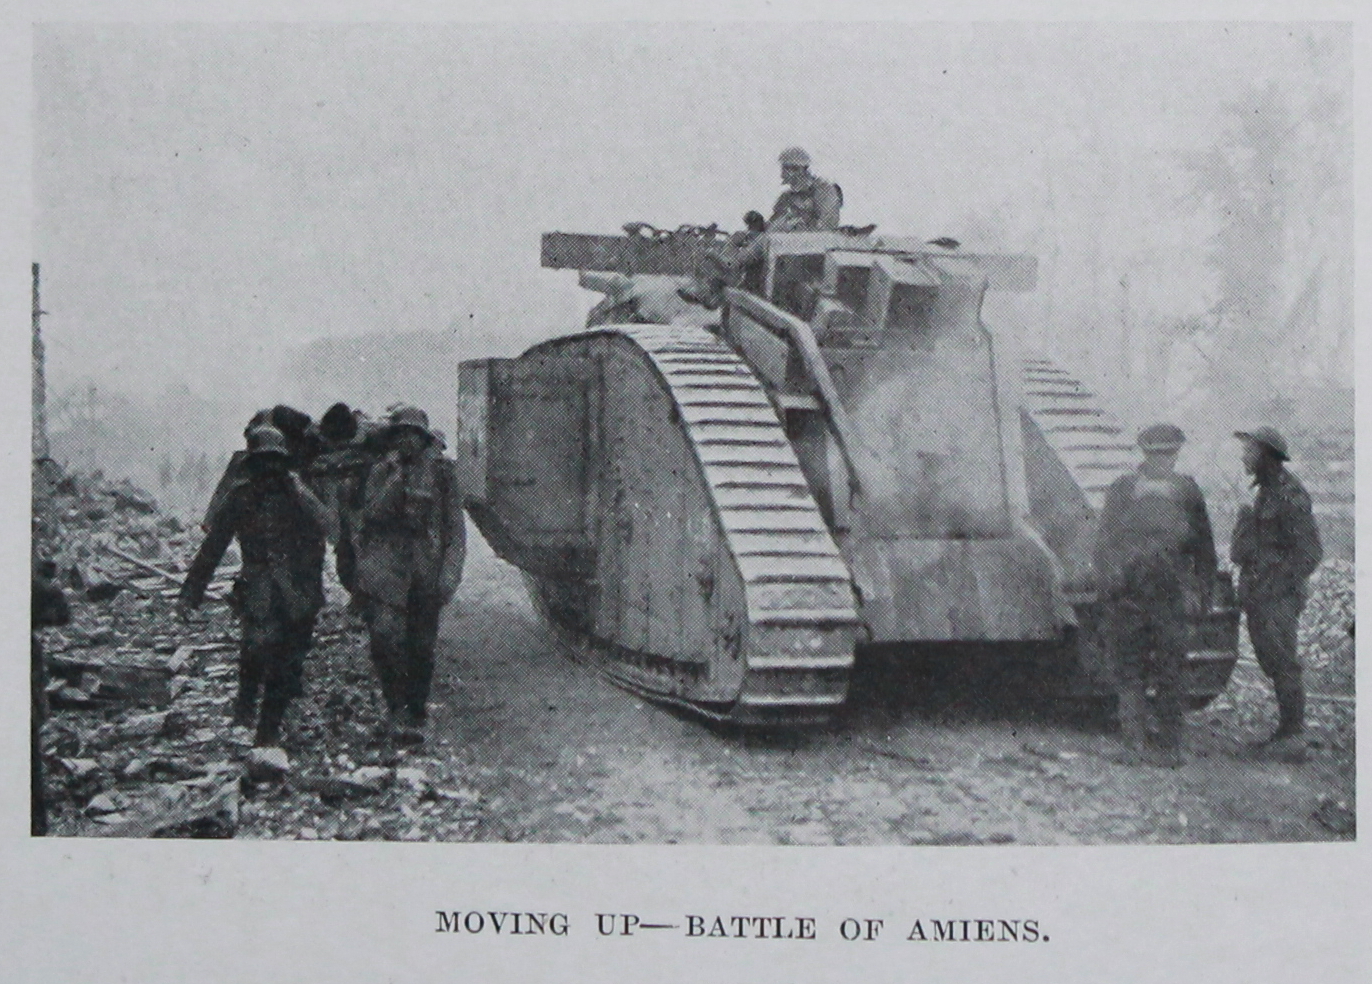 British tank moving up in the Battle of Amiens. German prisoners on the left carry a casualty to the rear on a stretcher. From The Tank Corps by Major Clough Williams-Ellis and A. Williams-Ellis.